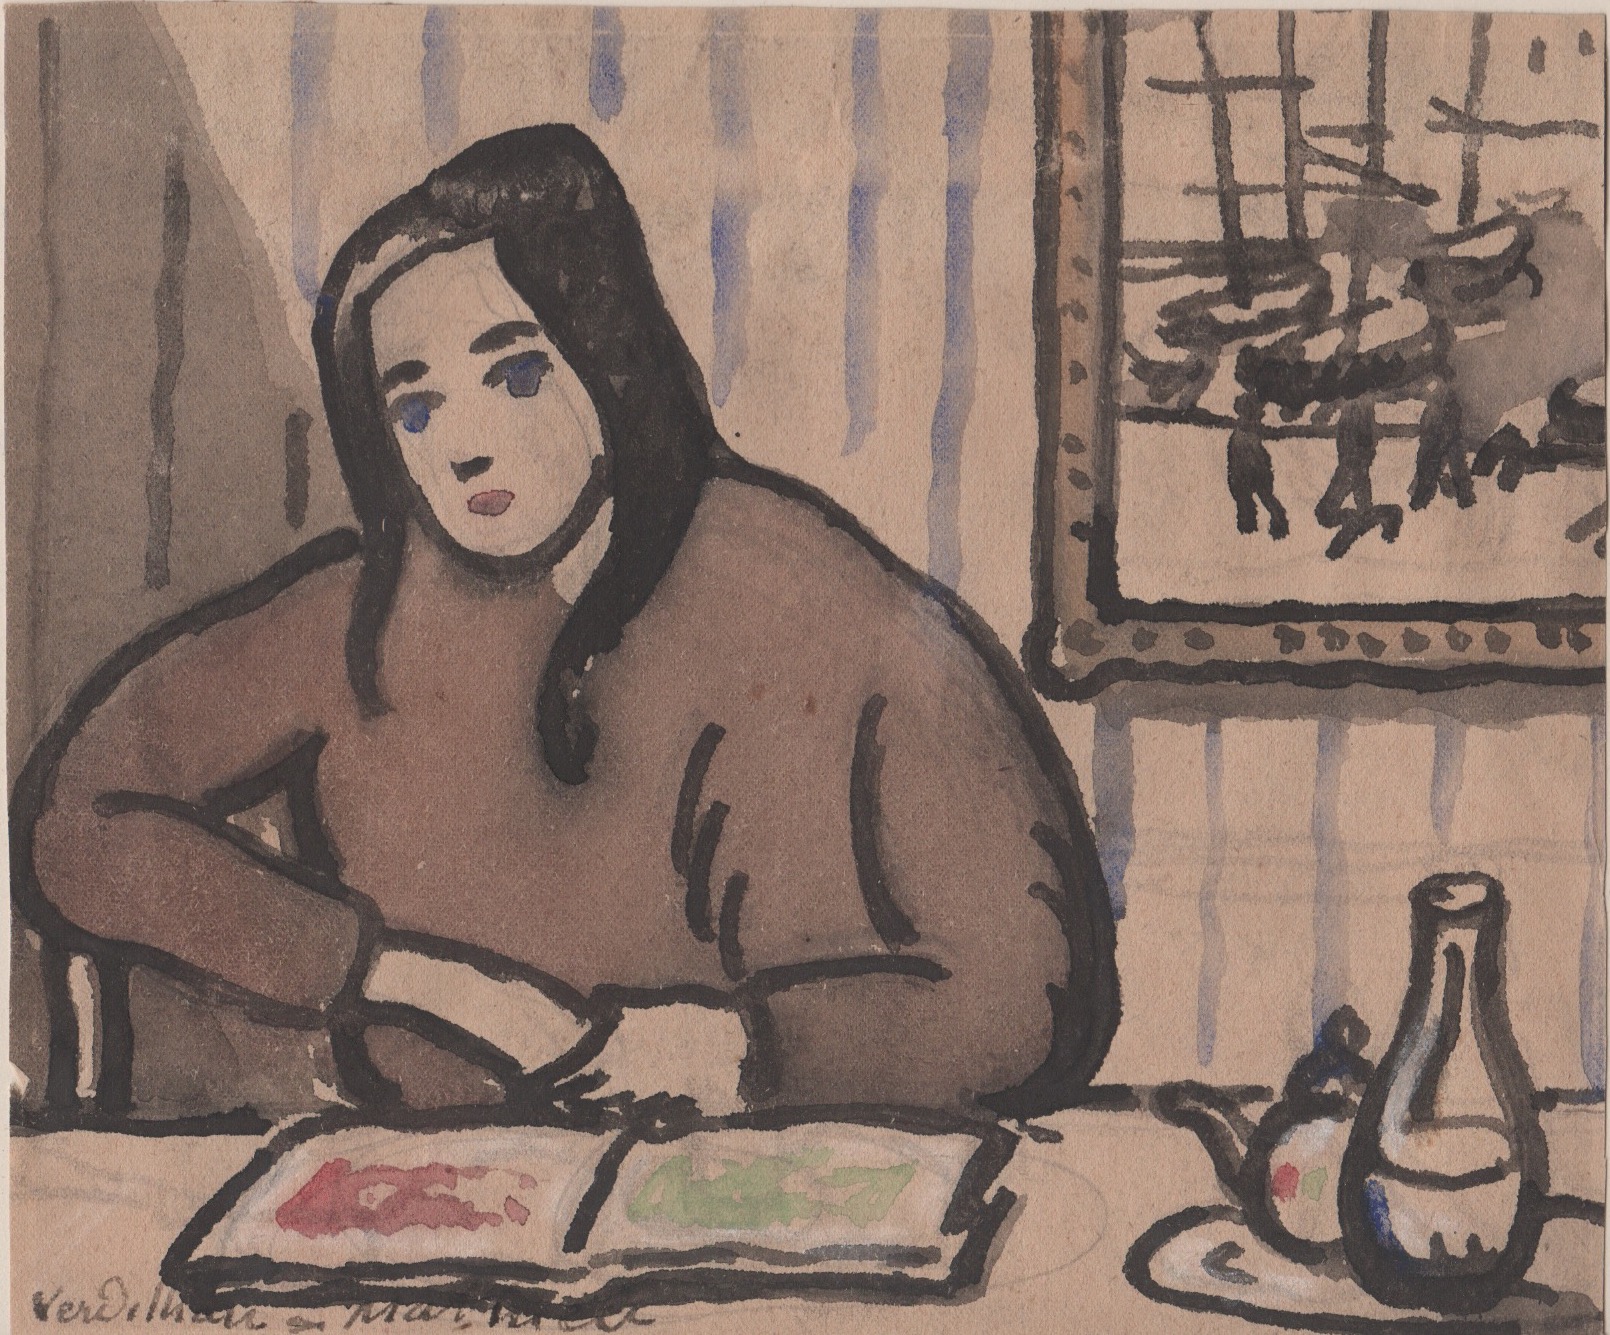 Watercolor of a woman sitting at a table with a tea pot and a pitcher next to her. Striped wallpaper and framed photo in background.